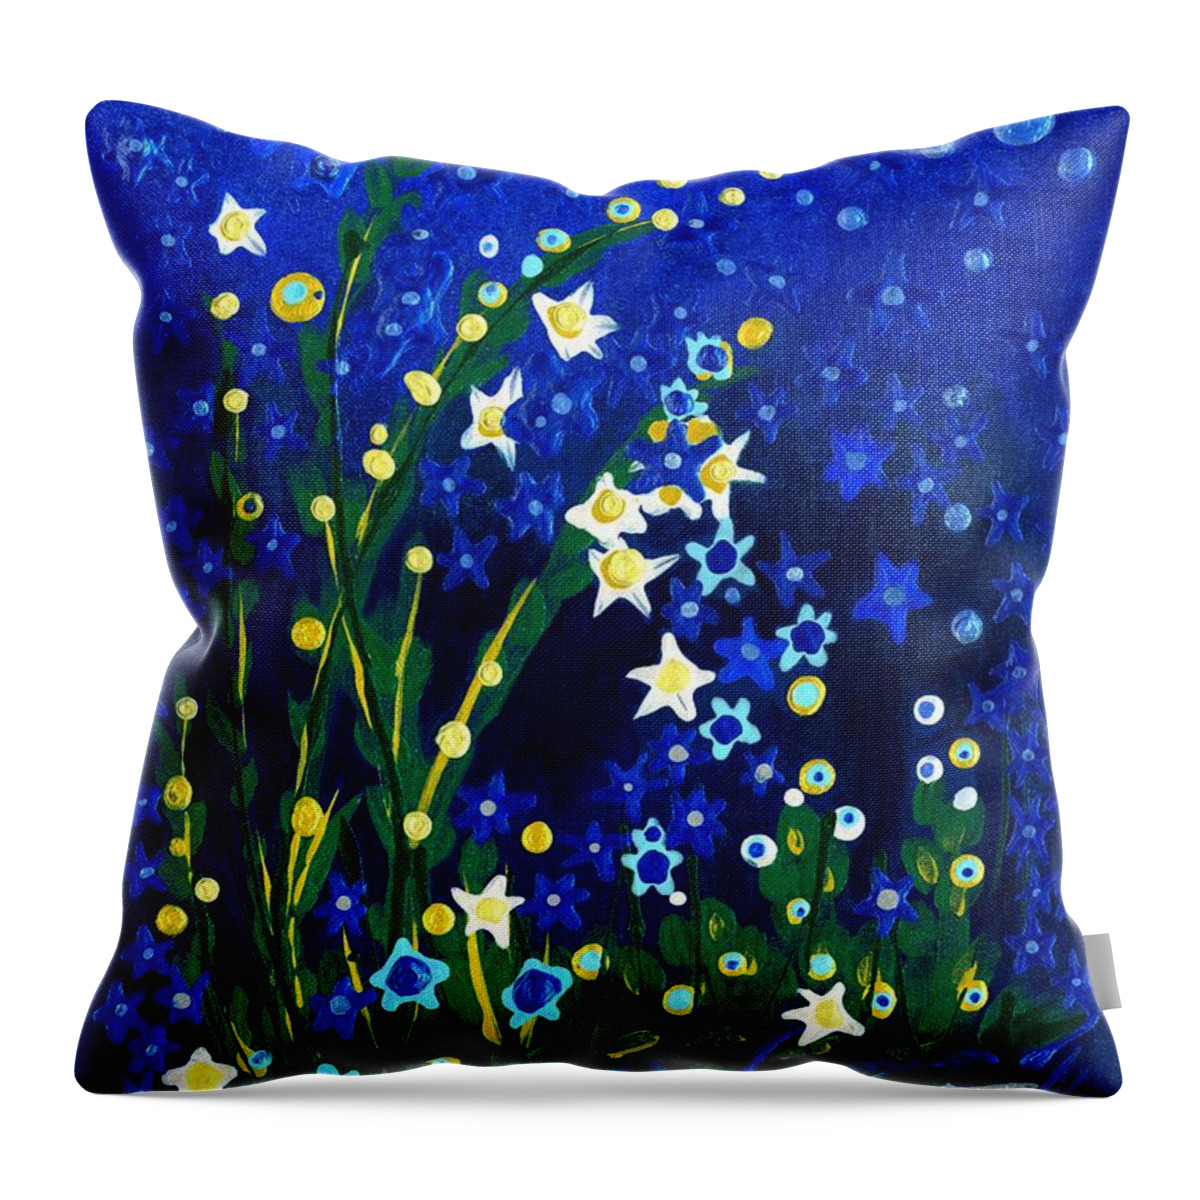 Nocturne Throw Pillow featuring the painting Nocturne by Holly Carmichael